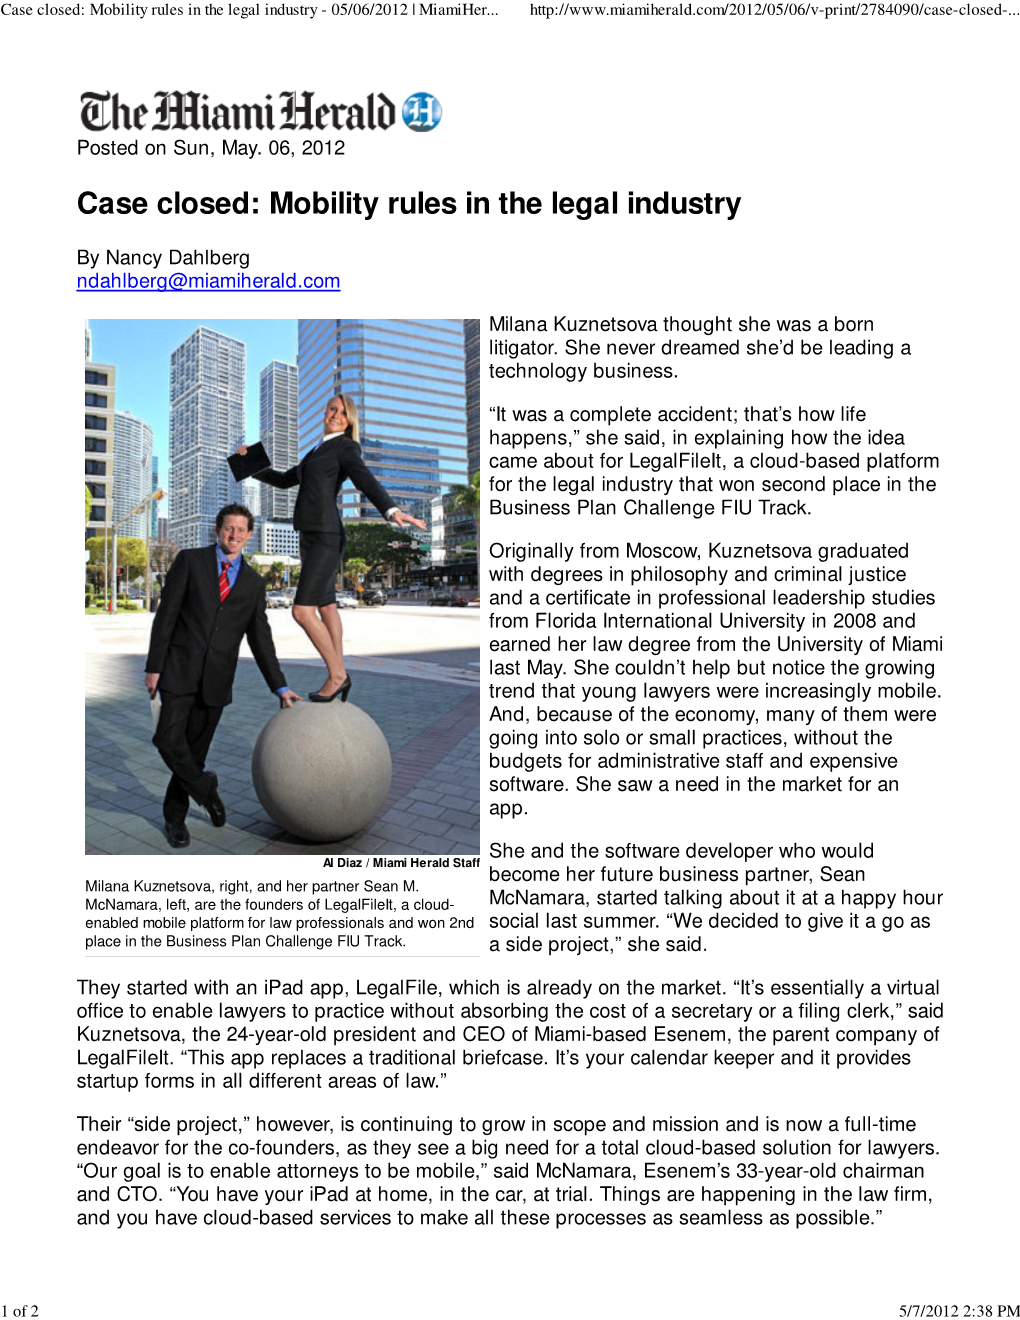 Case Closed: Mobility Rules in the Legal Industry - 05/06/2012 | Miamiher